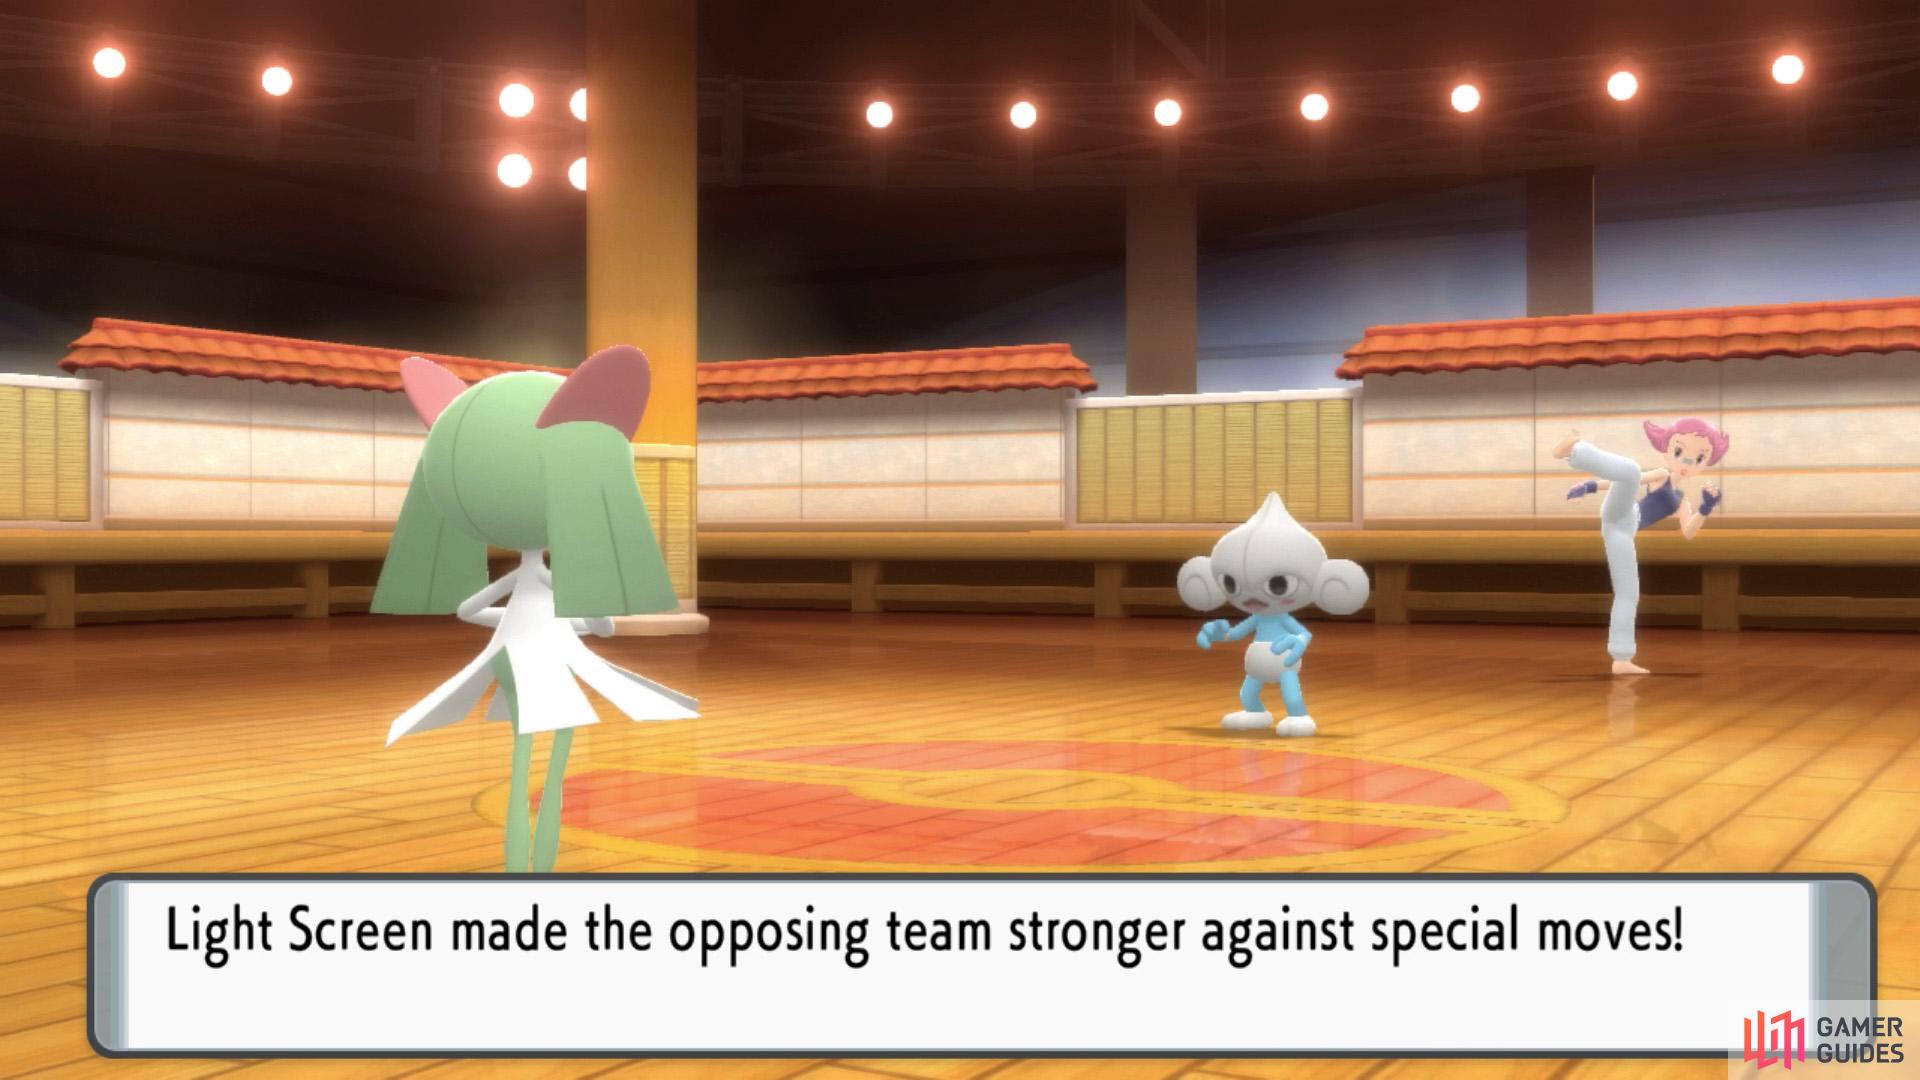 Be wary of Light Screen if using special moves.